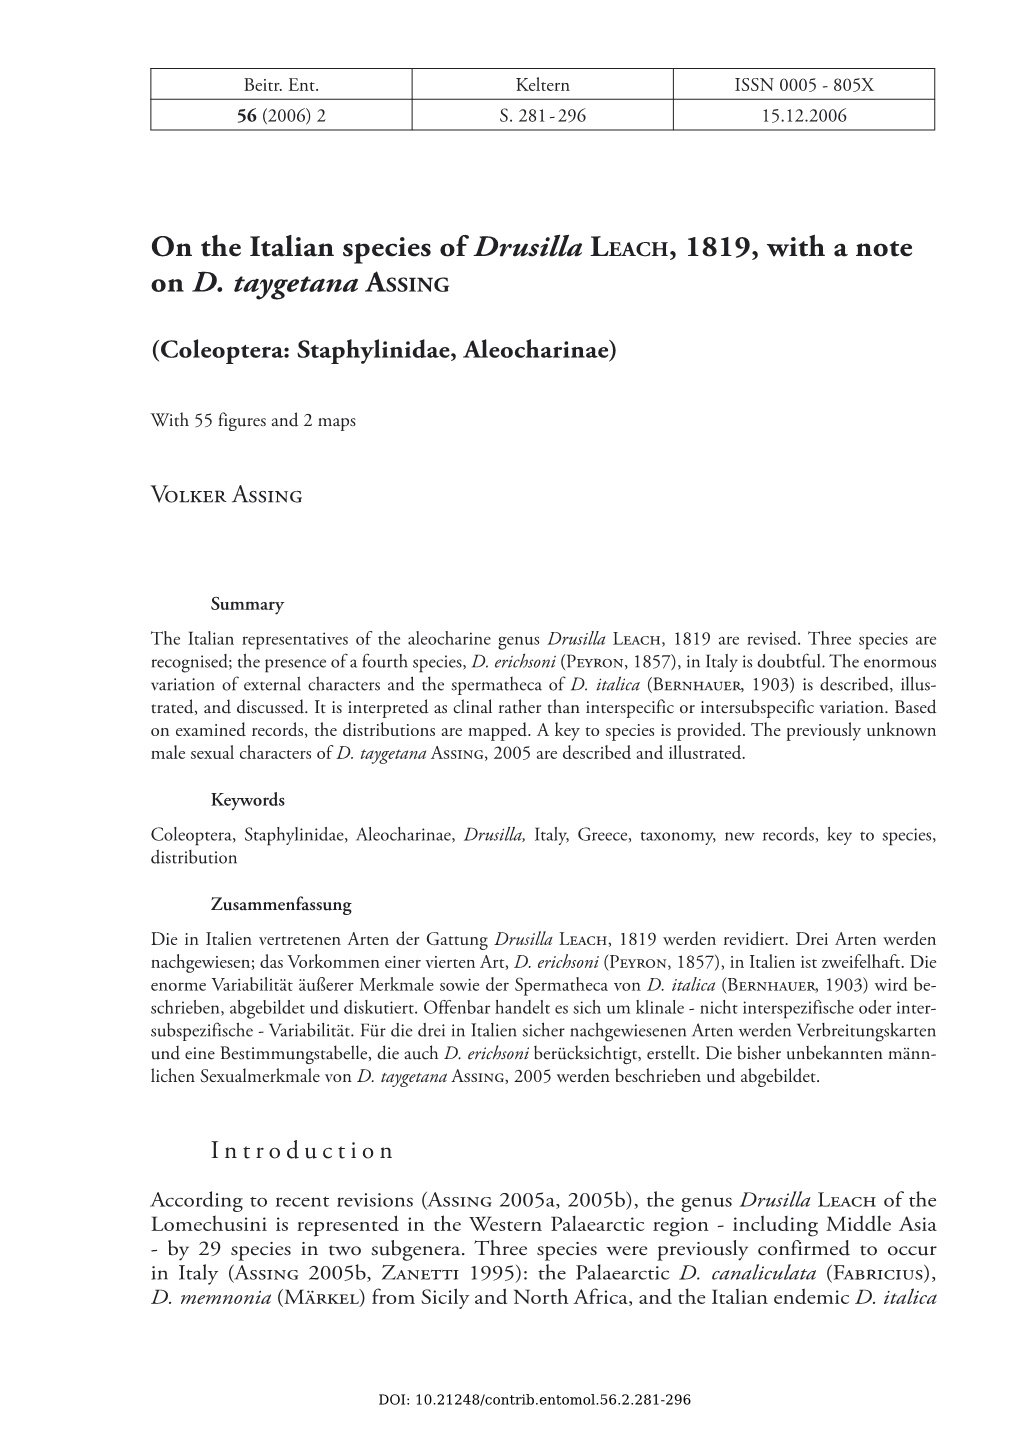 On the Italian Species of Drusilla LEACH, 1819, with a Note on D